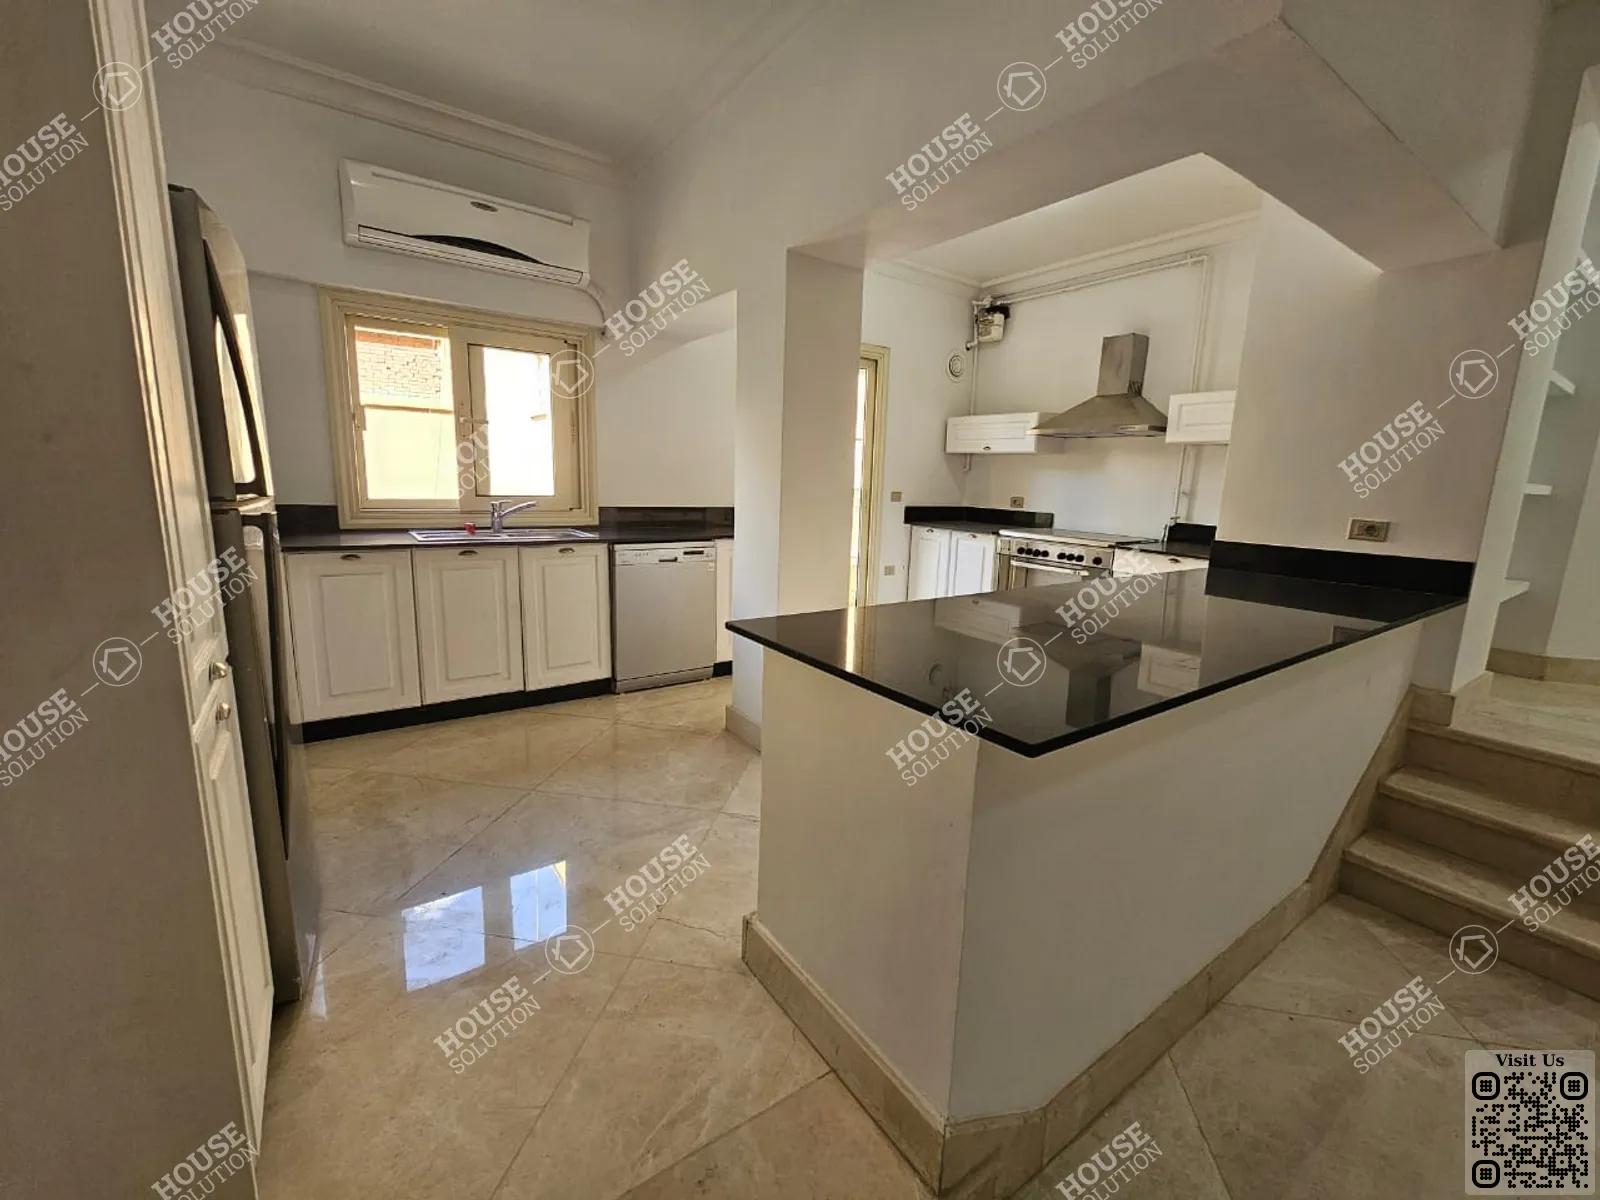 KITCHEN  @ Apartments For Rent In Maadi Maadi Sarayat Area: 320 m² consists of 4 Bedrooms 4 Bathrooms Modern furnished 5 stars #5806-1